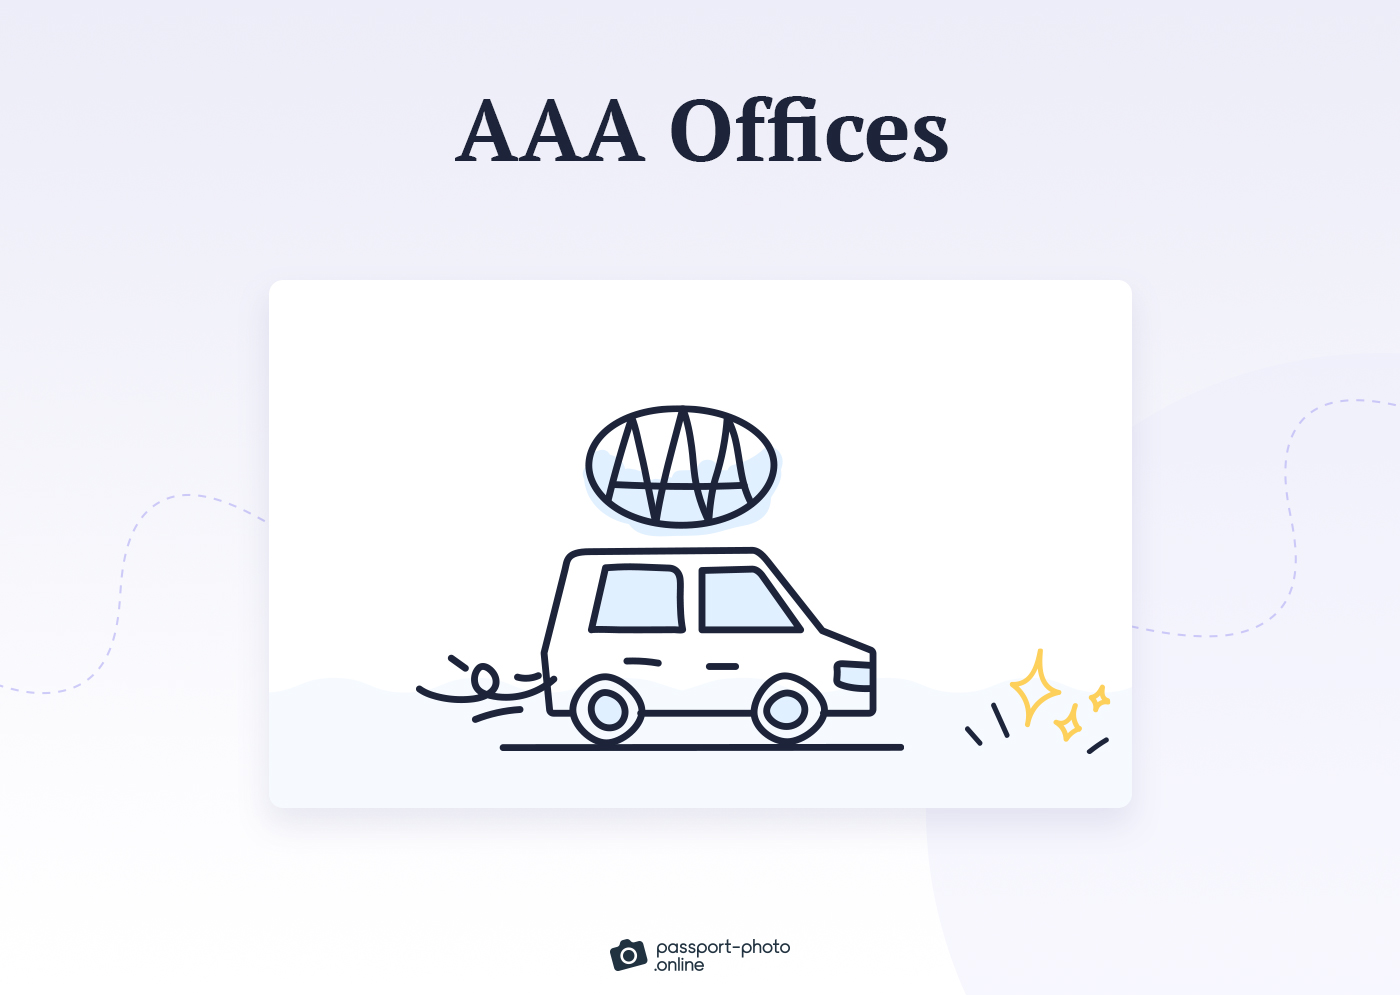 AAA offices offer members reduced prices for passport photos.